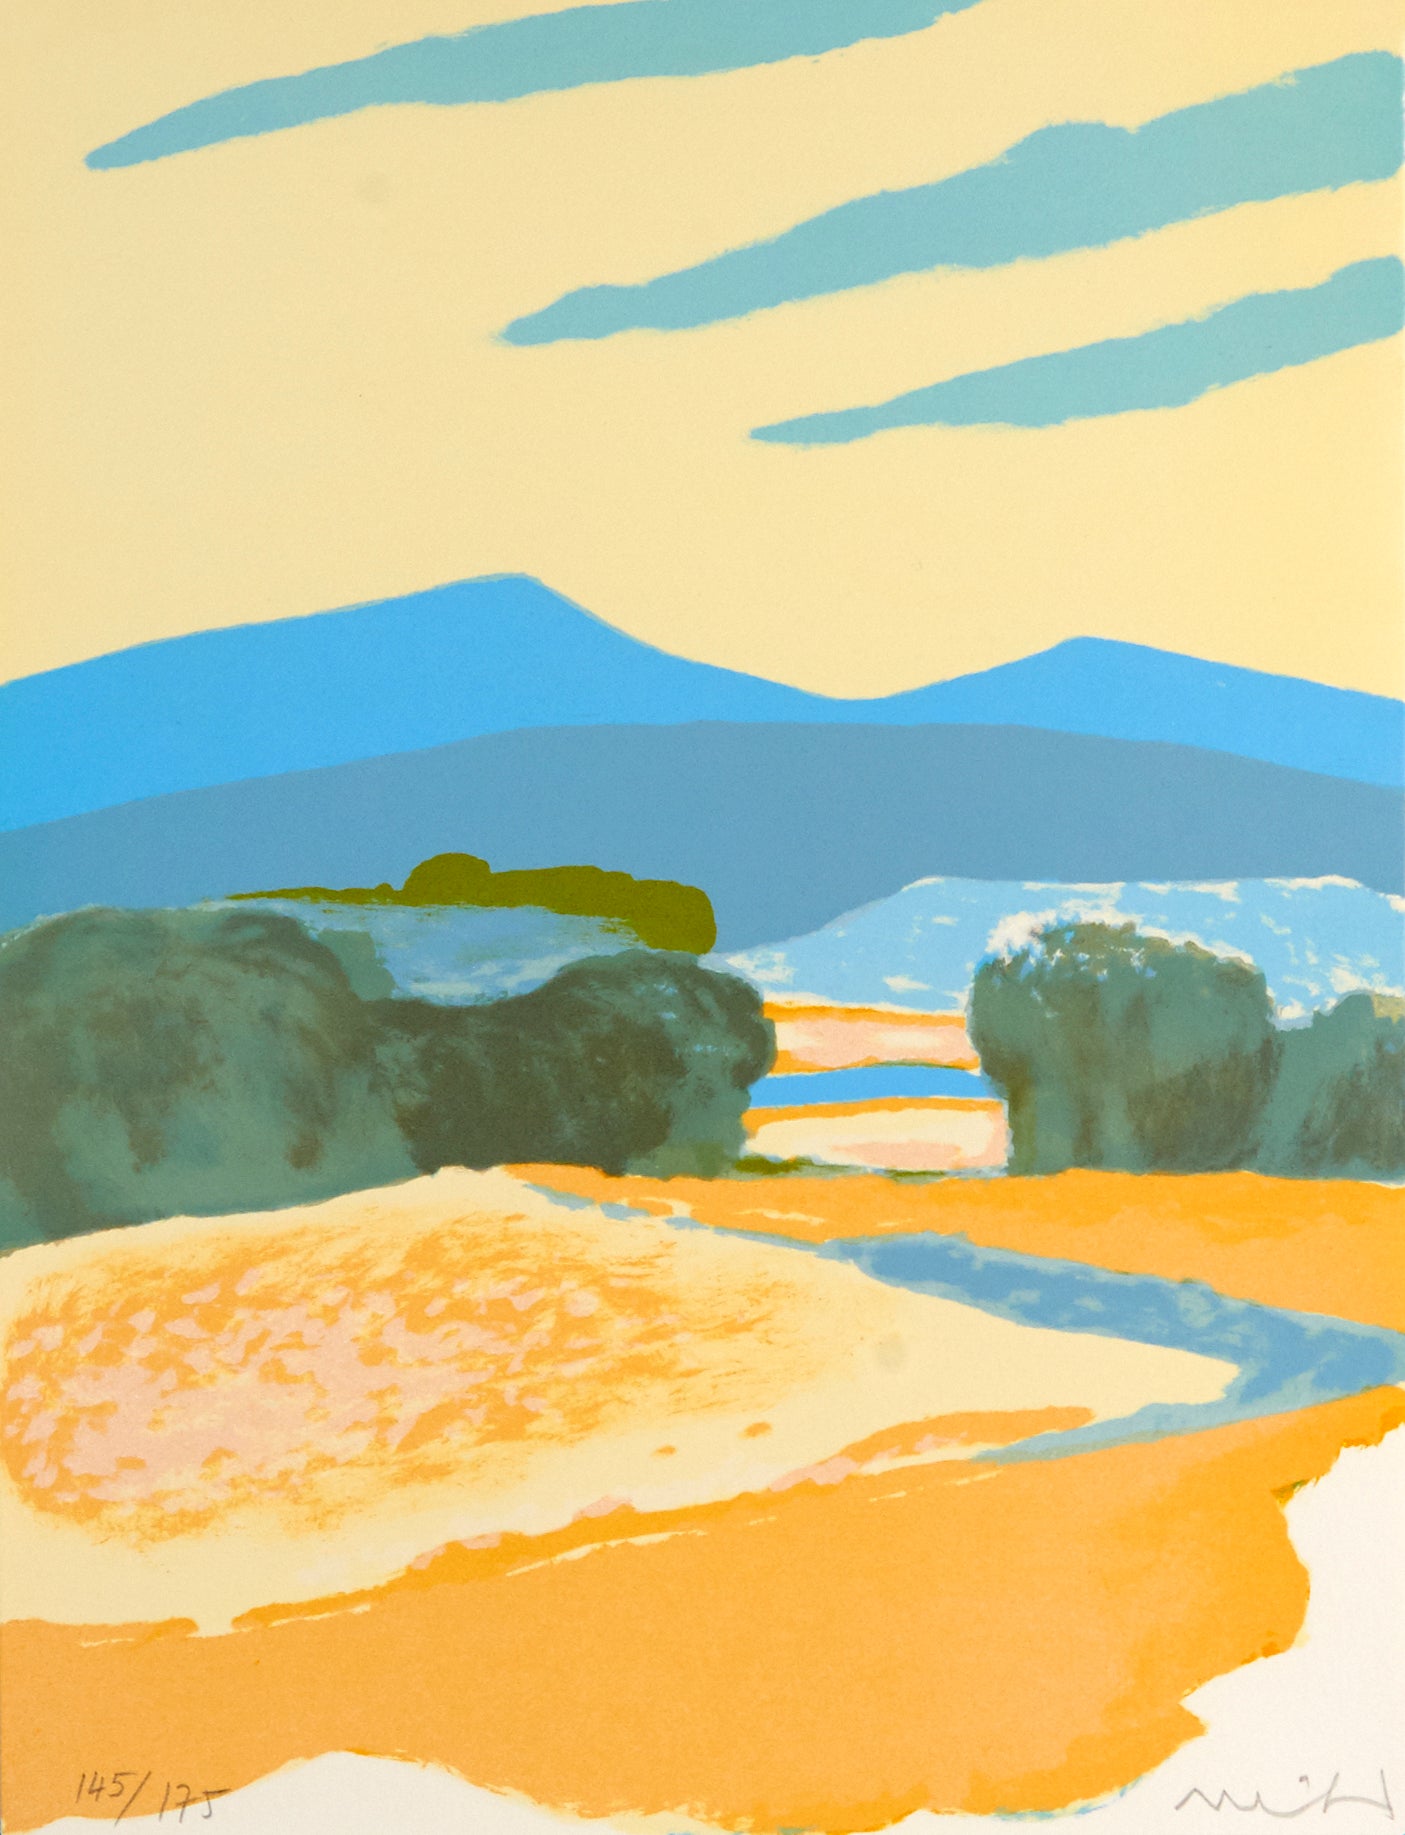 Provence III From the Portfolio "Provence" by Roger Mühl, 1986 - Mourlot Editions - Fine_Art - Poster - Lithograph - Wall Art - Vintage - Prints - Original